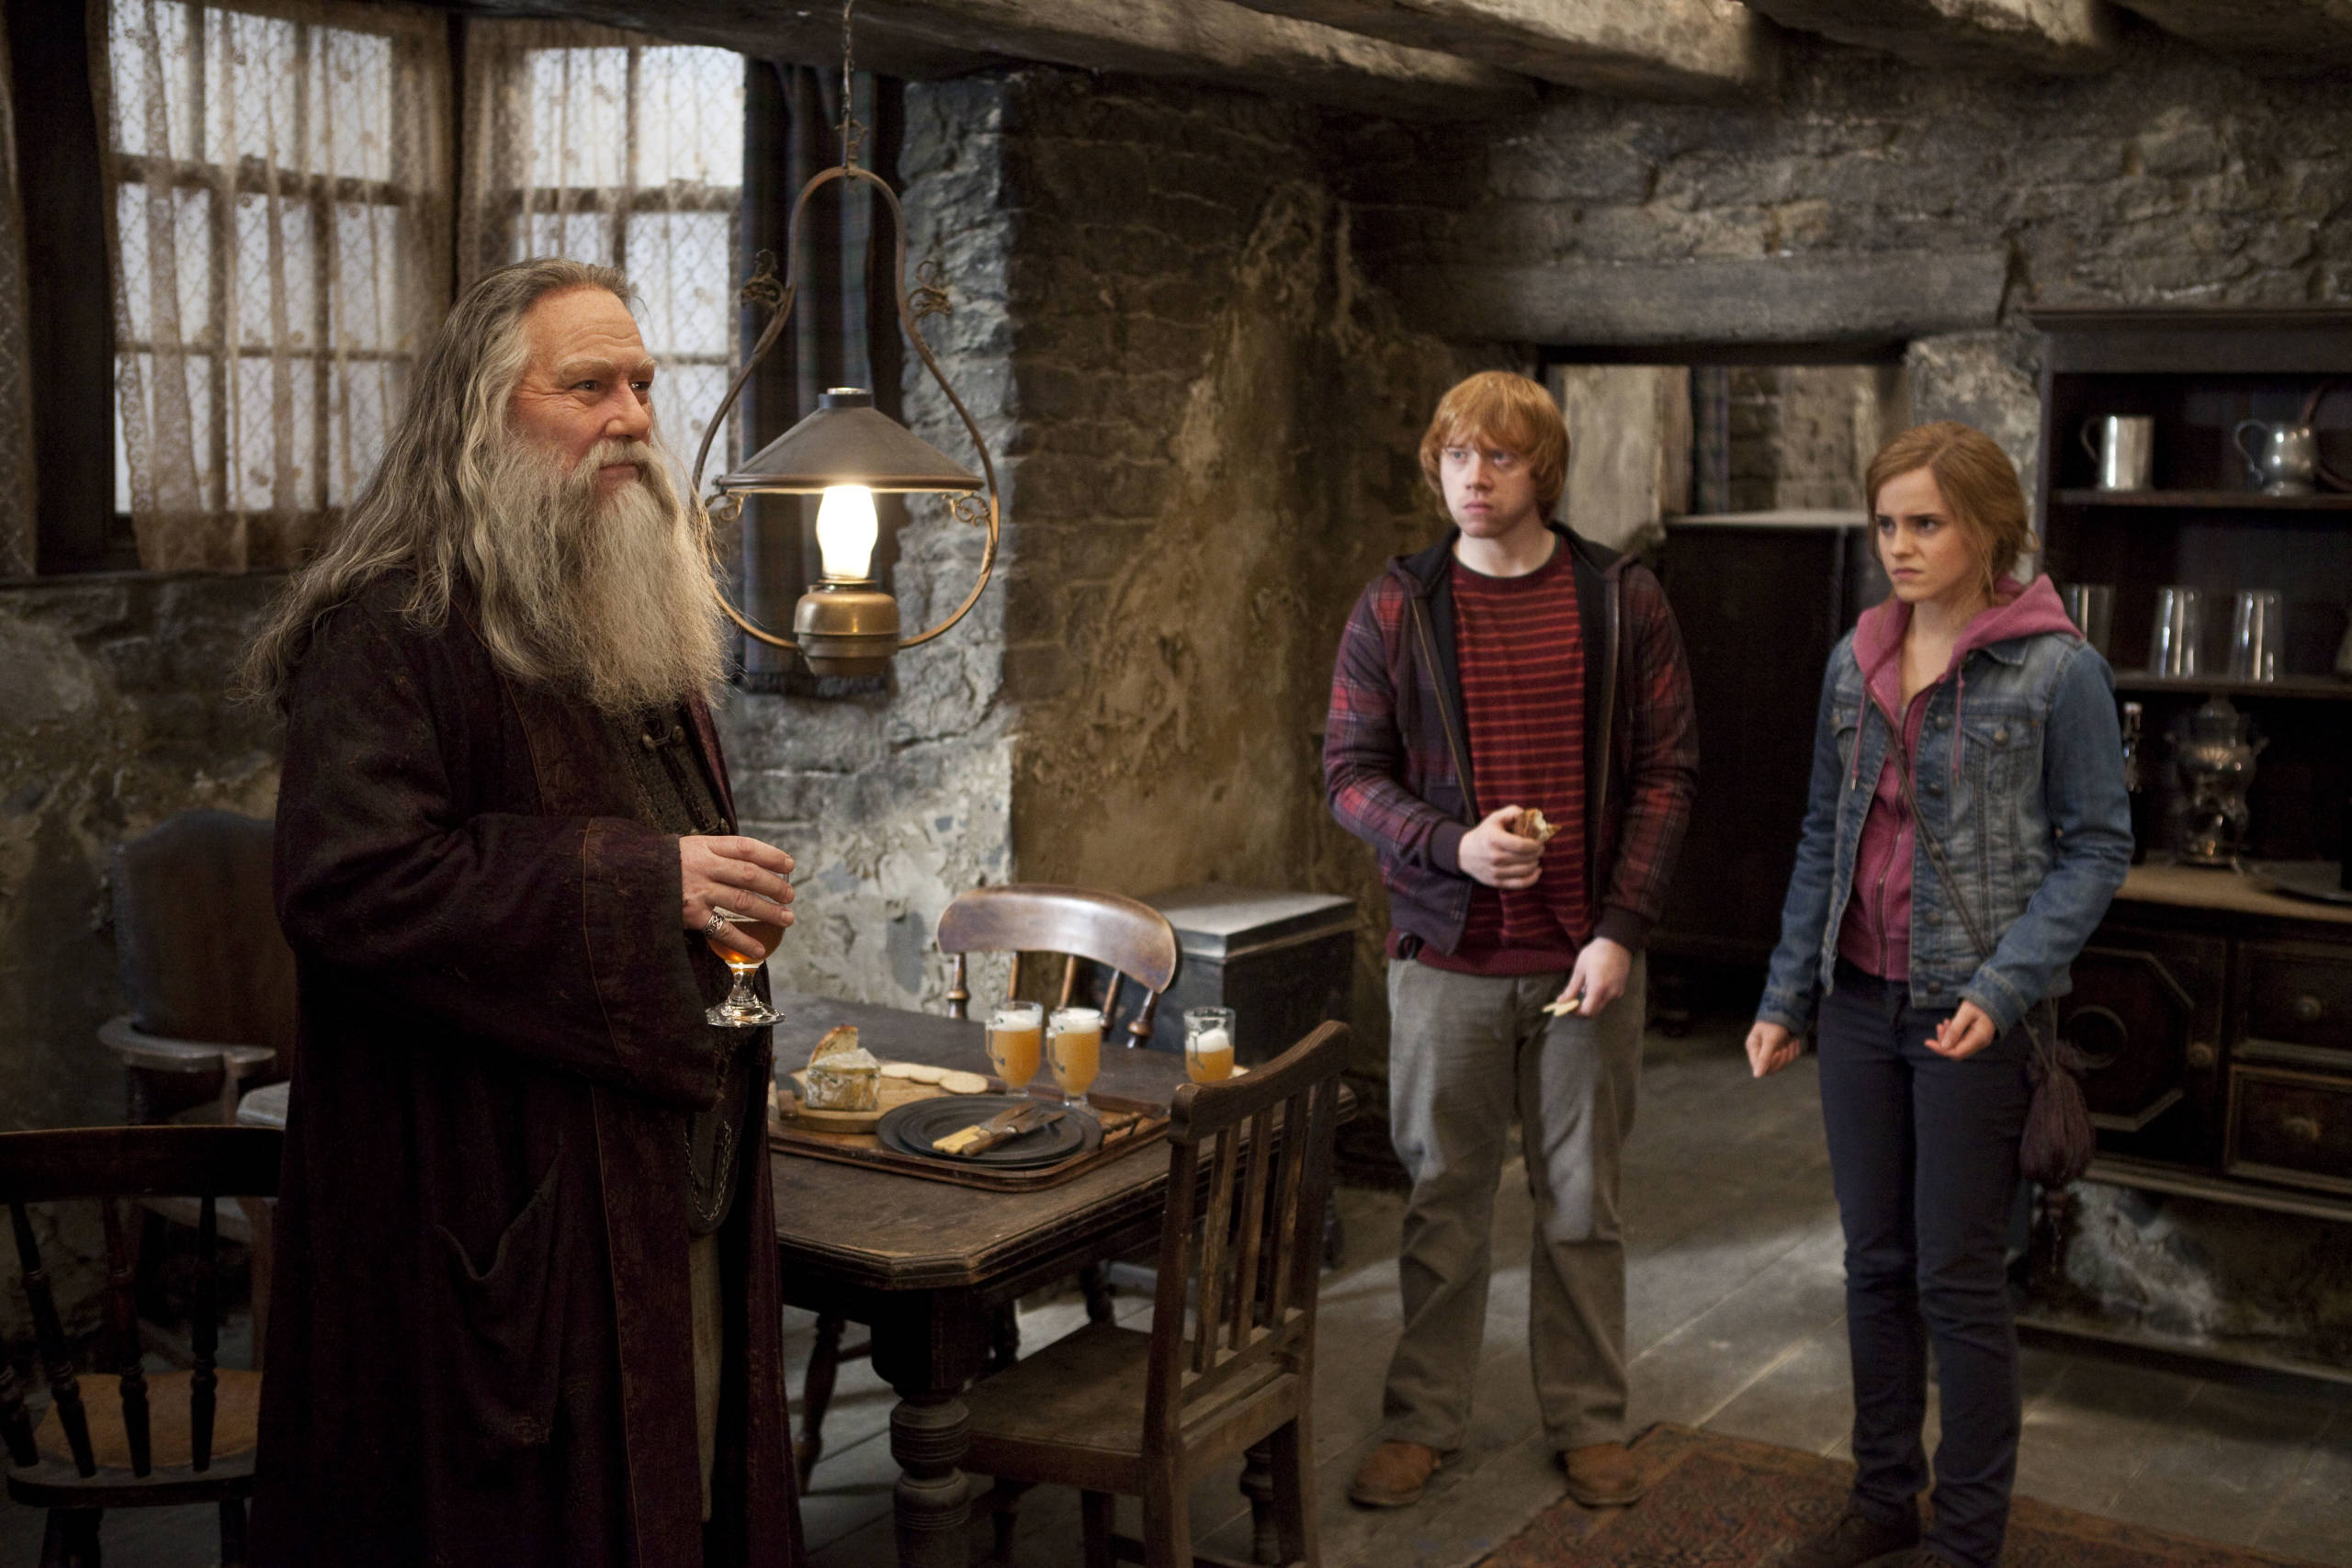 Aberforth Dumbledore standing in the Hog's Head Inn with Ron and Hermione